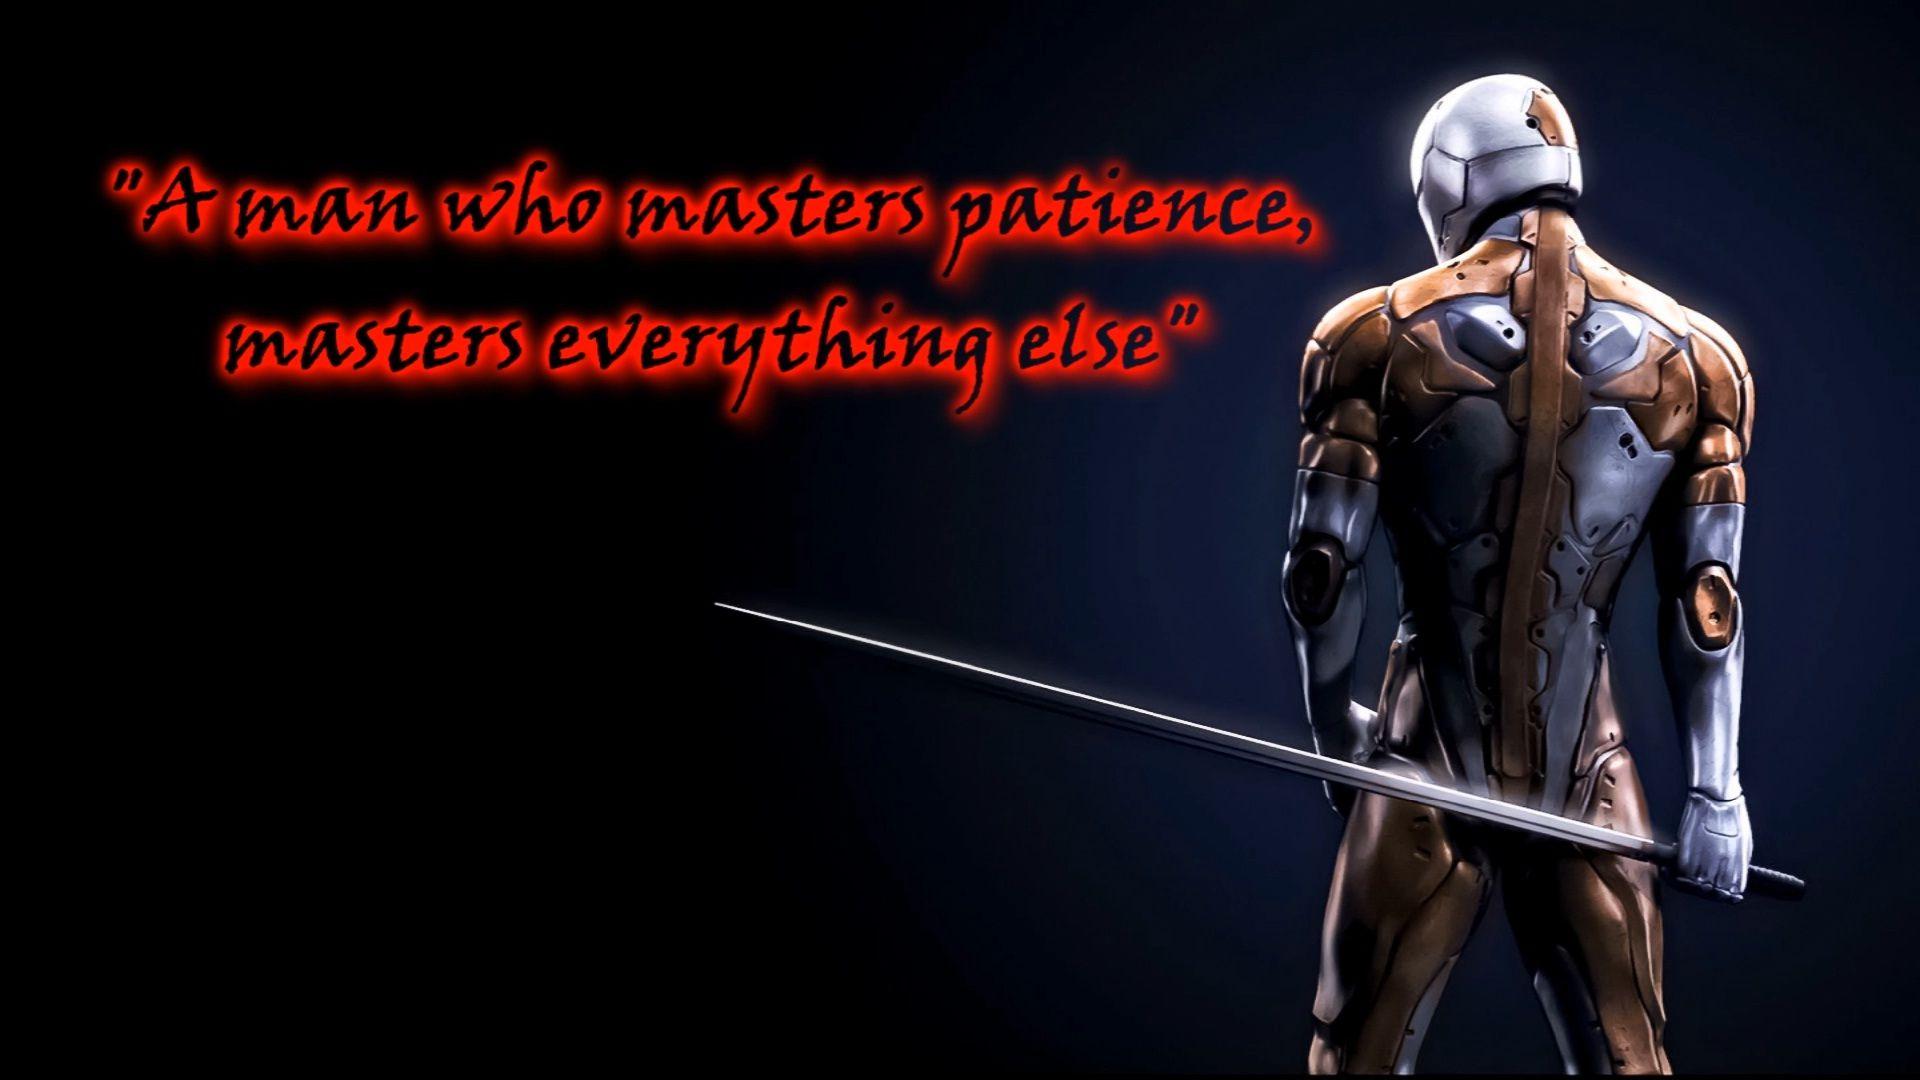 Patience Full HD Wallpaper and Background Imagex1080